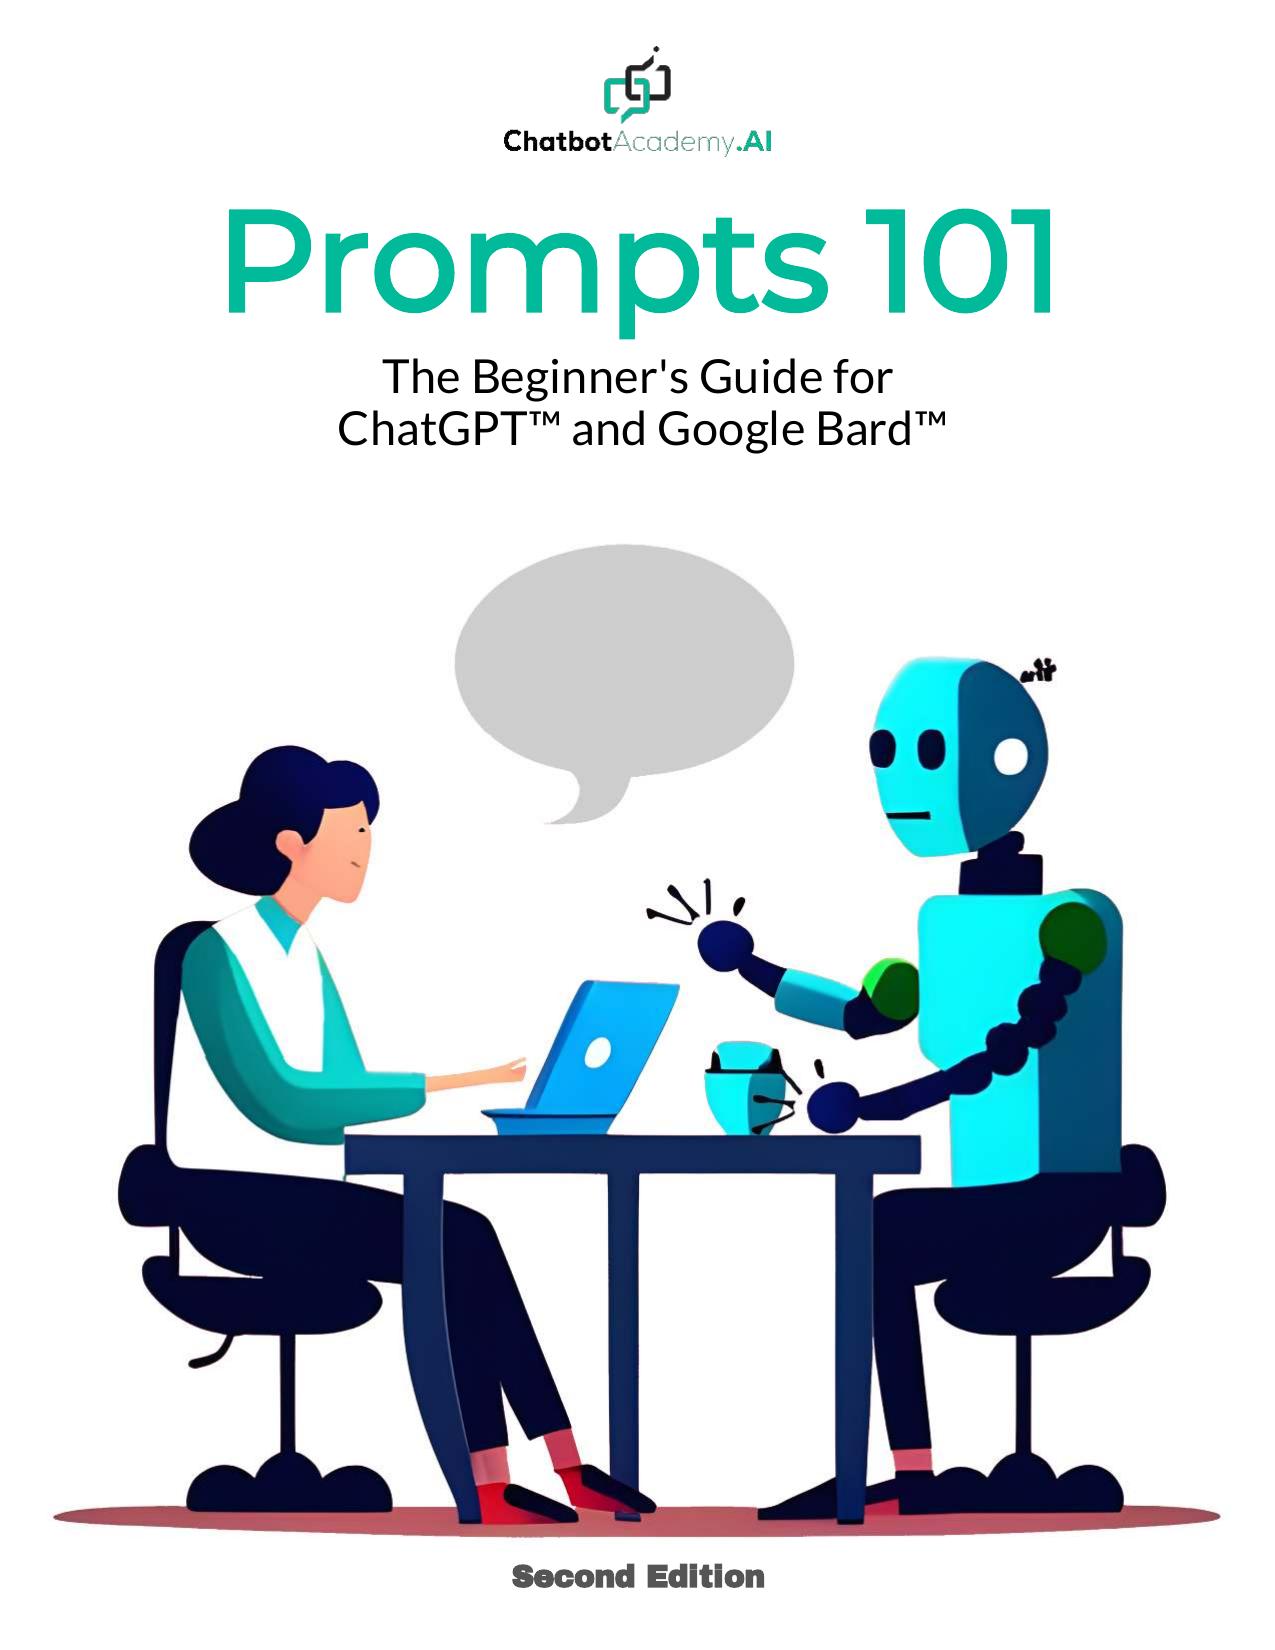 Prompts 101 - The Beginner's Guide for ChatGPT™ and Google Bard™